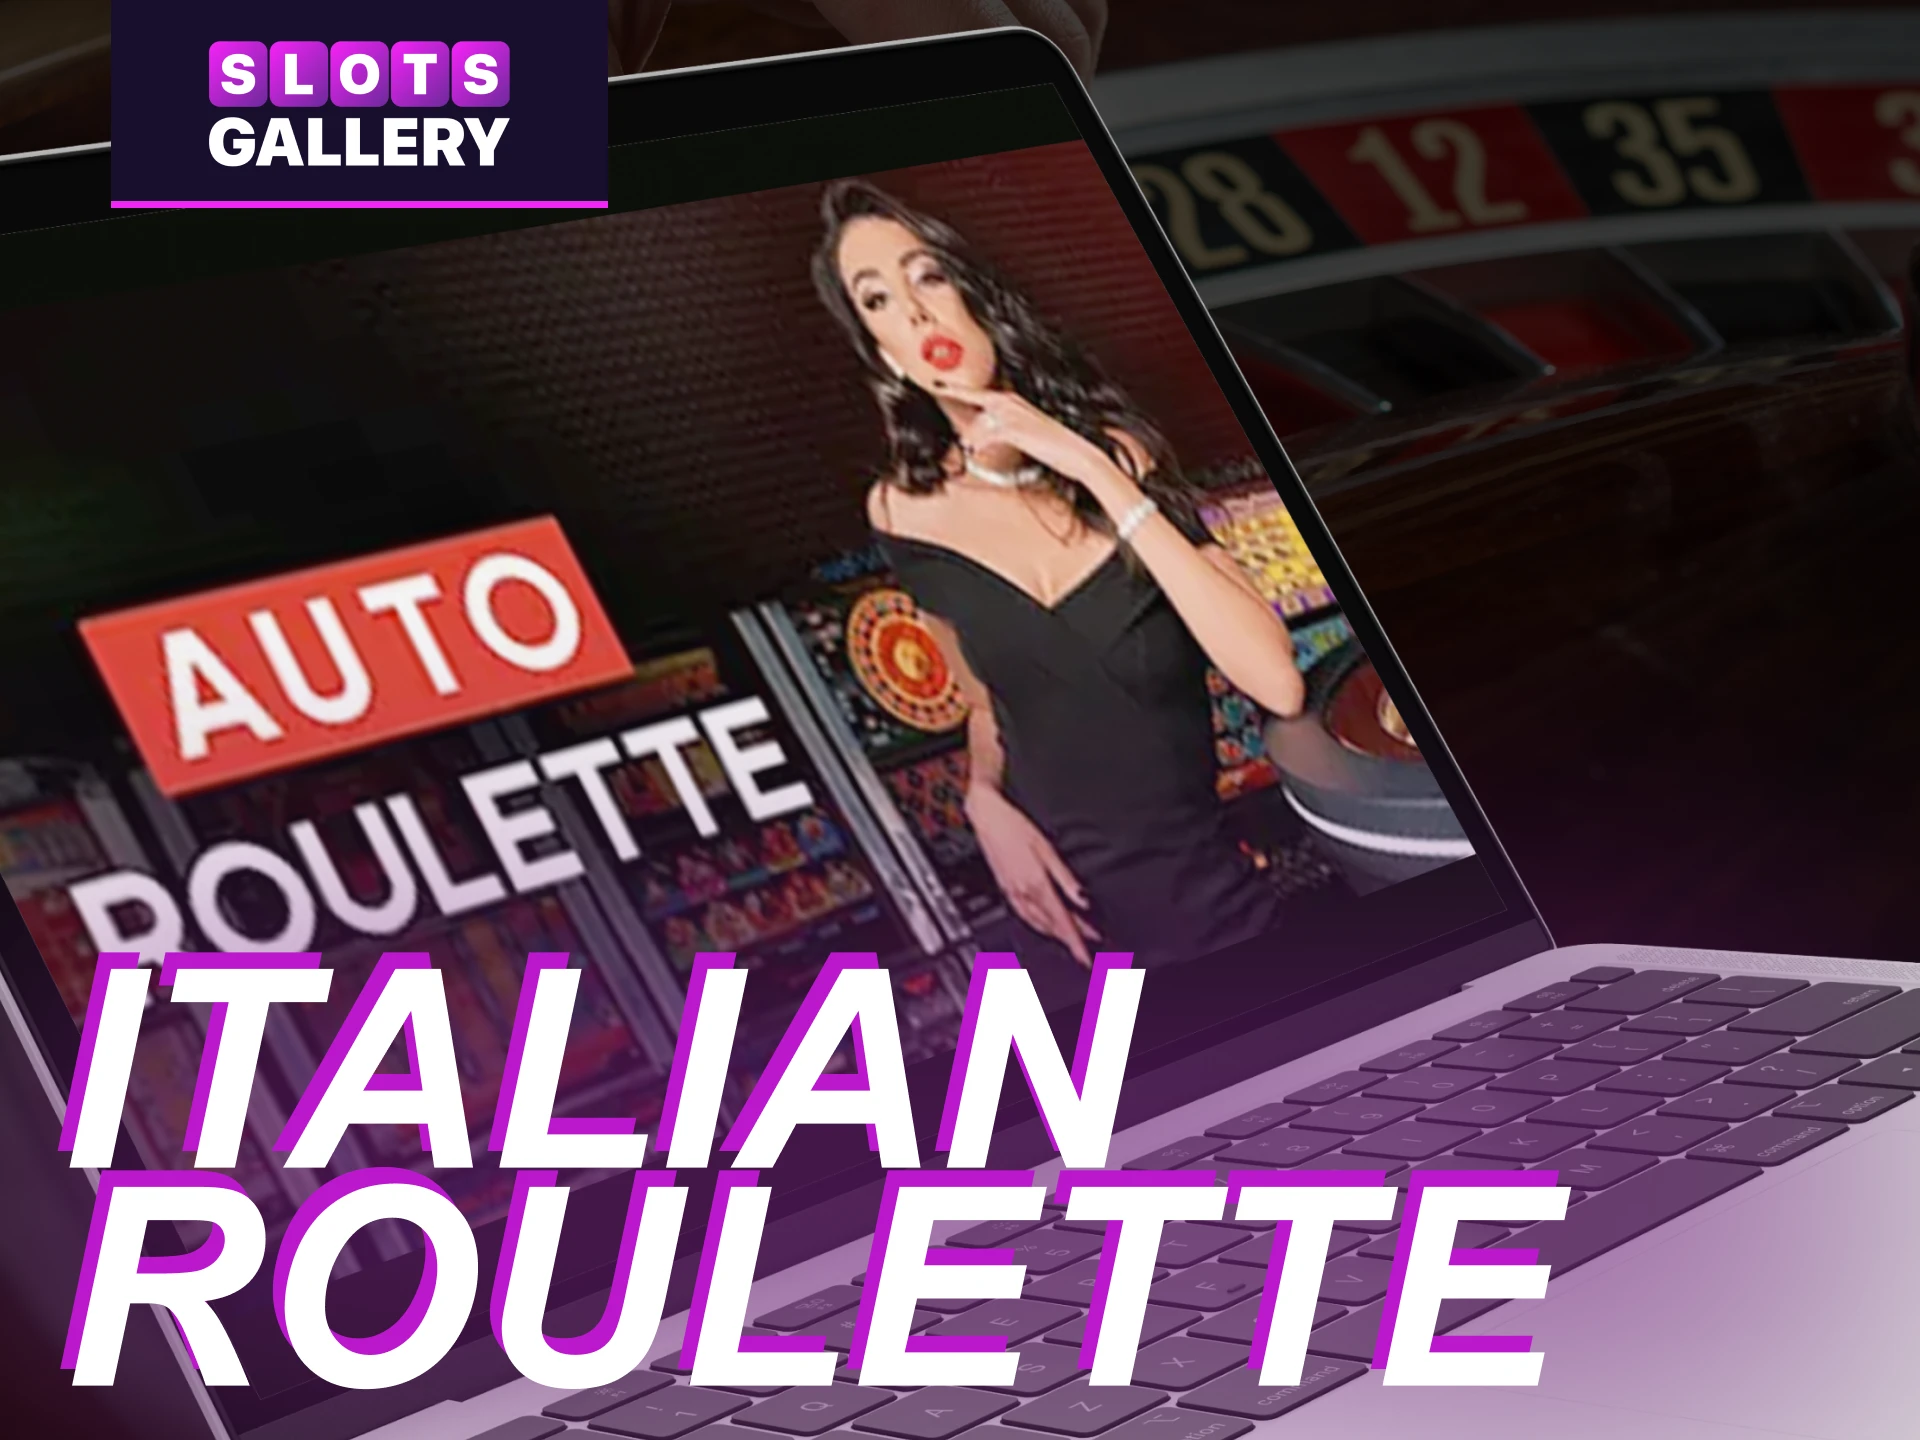 What is the task of players in Italian roulette at the online casino Slots Gallery.